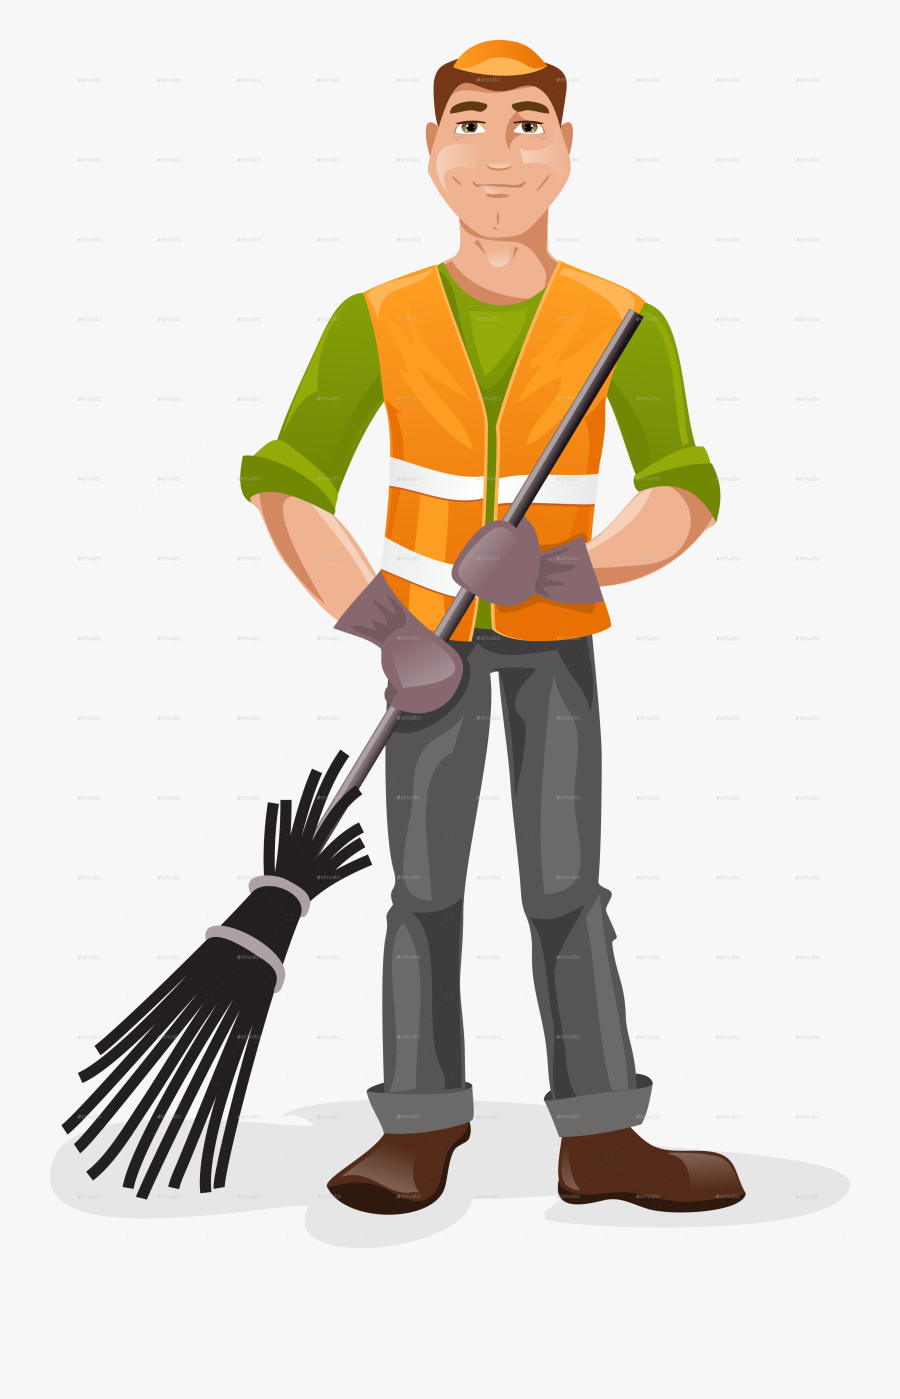 Closet Clipart Janitor - Janitor Png, Transparent Clipart